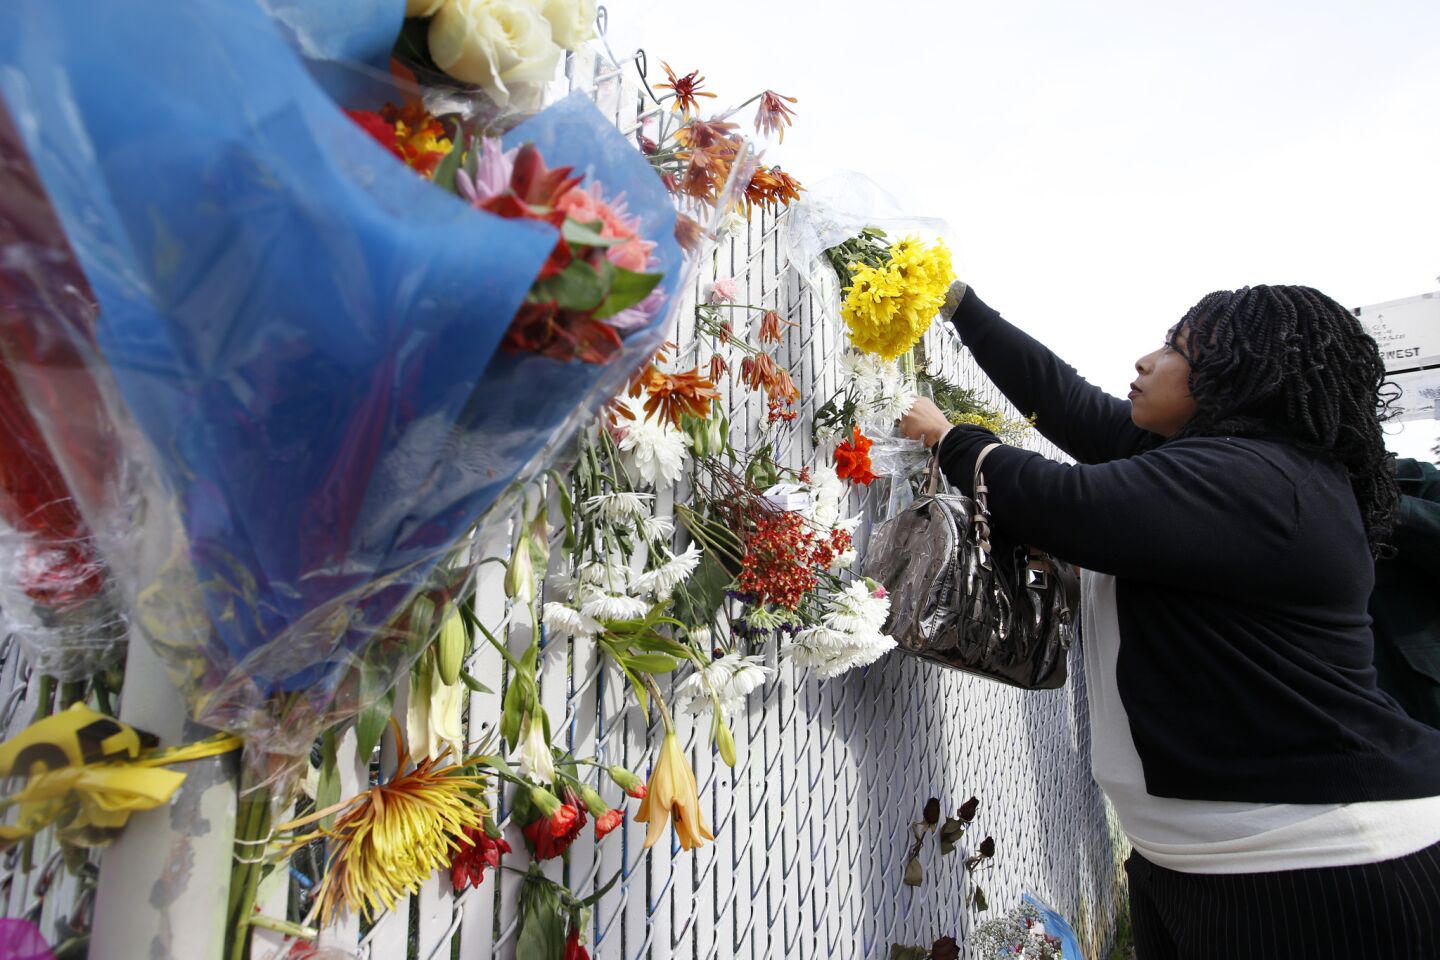 After attending church, Teionna Cunningham of Oakland leaves flowers near the site of the fire.